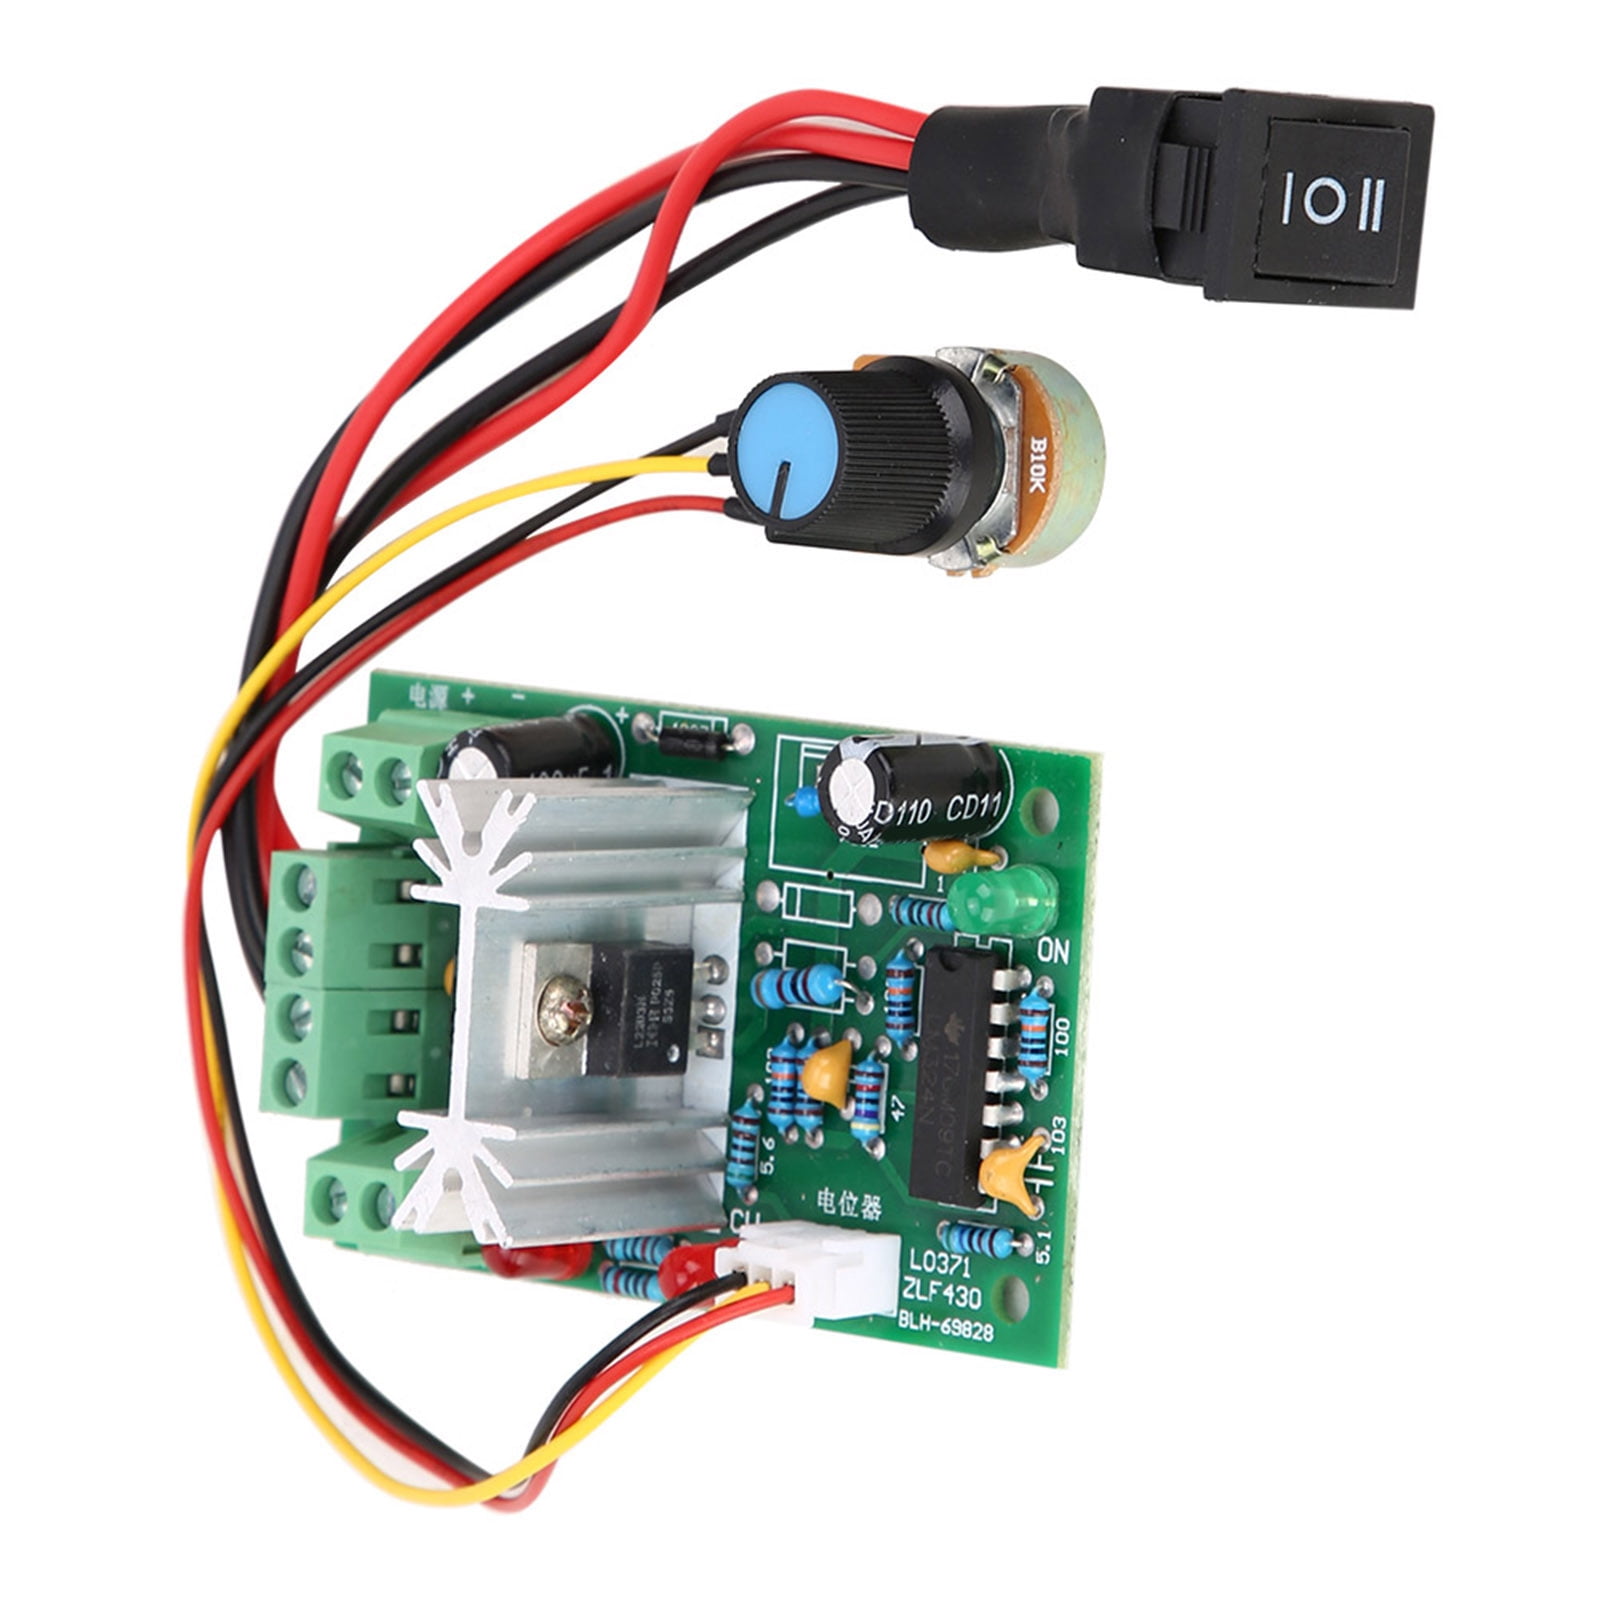 Higoodz Remote Control DC Brush Motor Speed Controller 6.5V-55V 30A LCD  Motor Cycle Run/Stop Timer,Motor Cycle Timer,RC Motor Speed Controller 